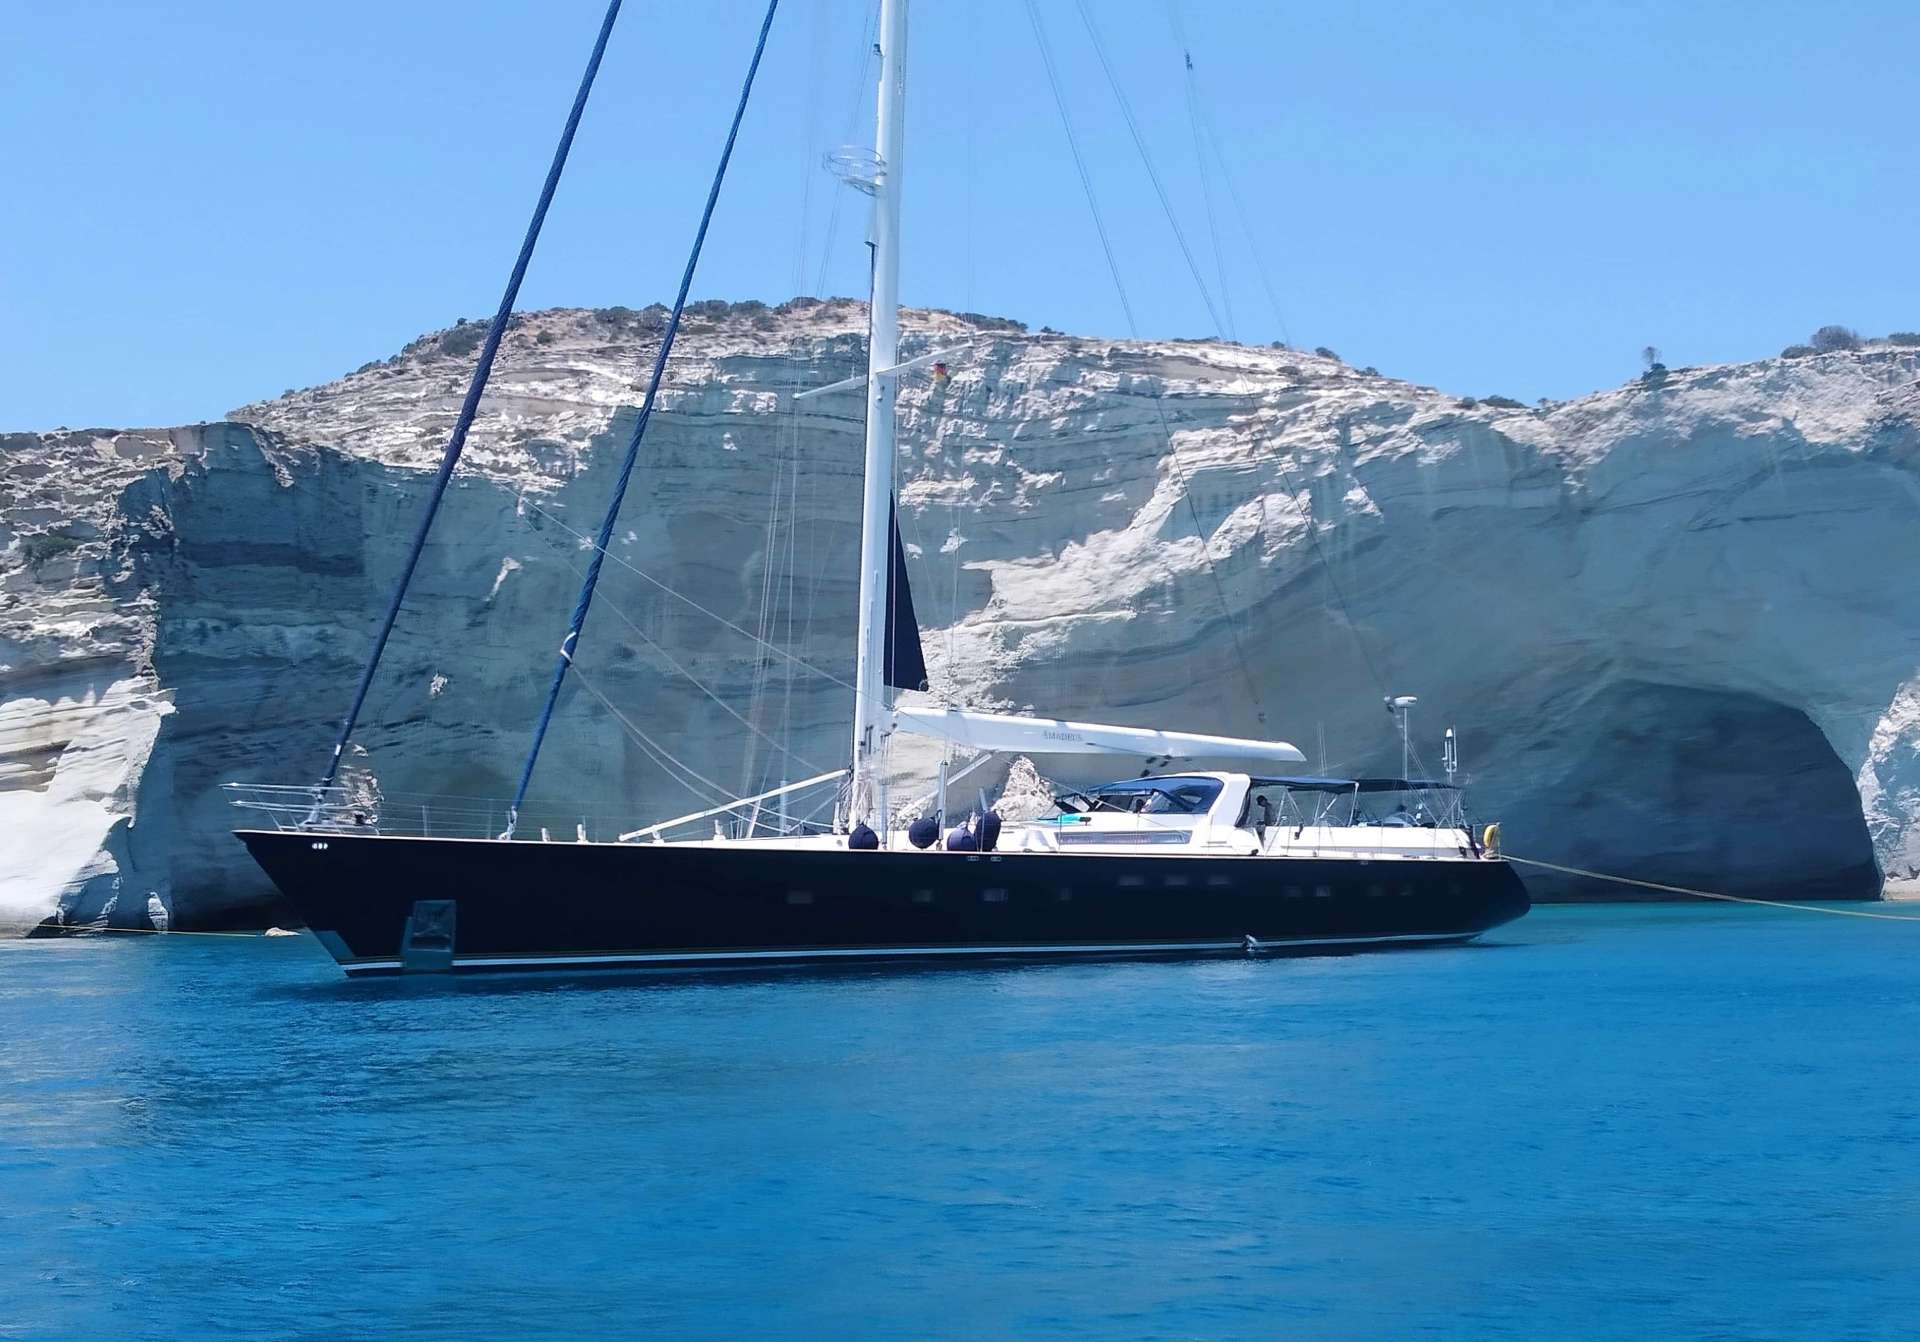 Built by the famous Dynamique Yachts shipyard, and having undergone a total refit in 2018, S/Y Amadeus was designed to please the most demanding of yachtsmen. Built for smooth sailing, this elegant cutter rigged sloop has a sleek hull design, comfortably reaching top speeds of 12 knots and ensuring excellent sailing performance. 

S/Y Amadeus has just undergone this past winter (2018) a major refit such as total repaint top to bottom, new rigging (BSI Denmark), Novourania with new Evinrude 75hp outboard,  Splash pool, new Bimini/Sprayhood/Awnings, new exterior fabrics and many other enhancements.  In 2016 new &ldquo;North Sails&rdquo; were placed onboard. The yacht is maintained in excellent condition with a five-star crew year round.

Her generous uncluttered teak deck offers plenty of space for sunbathing. The spacious and unique outdoor saloon has two tables seating upto 12 guests and is a perfect setting for outdoor dining and entertainment. Thanks to a special canopy and roll-up windows, the deck saloon has the added attraction that it can be fully enclosed, making it ideal for all weather conditions. Her forward area includes a splash pool and sun bathing area which can also be shaded with a removable awning.

From the cockpit, a stairway leads to the light-filled spacious saloon offering ample seating, ideal for relaxing or enjoying a drink from the bar, and offers a formal dining area. This area also includes a LCD TV, entertainment center, ipod dock station, playstation, and is ideal for indoor activities. 

She can accommodate 10-12 guests in one full width master stateroom, two double bedded cabins each having one extra single bed and two twin bedded cabins which can be easily converted to double beds (upon request), thus, making her the only 5 double bedded sailboat in the Greek market.

She also has a nice selection of toys which include water ski (adult and children), tubes, inflatable canoes, wakeboard, fishing rod and snorkeling gear.